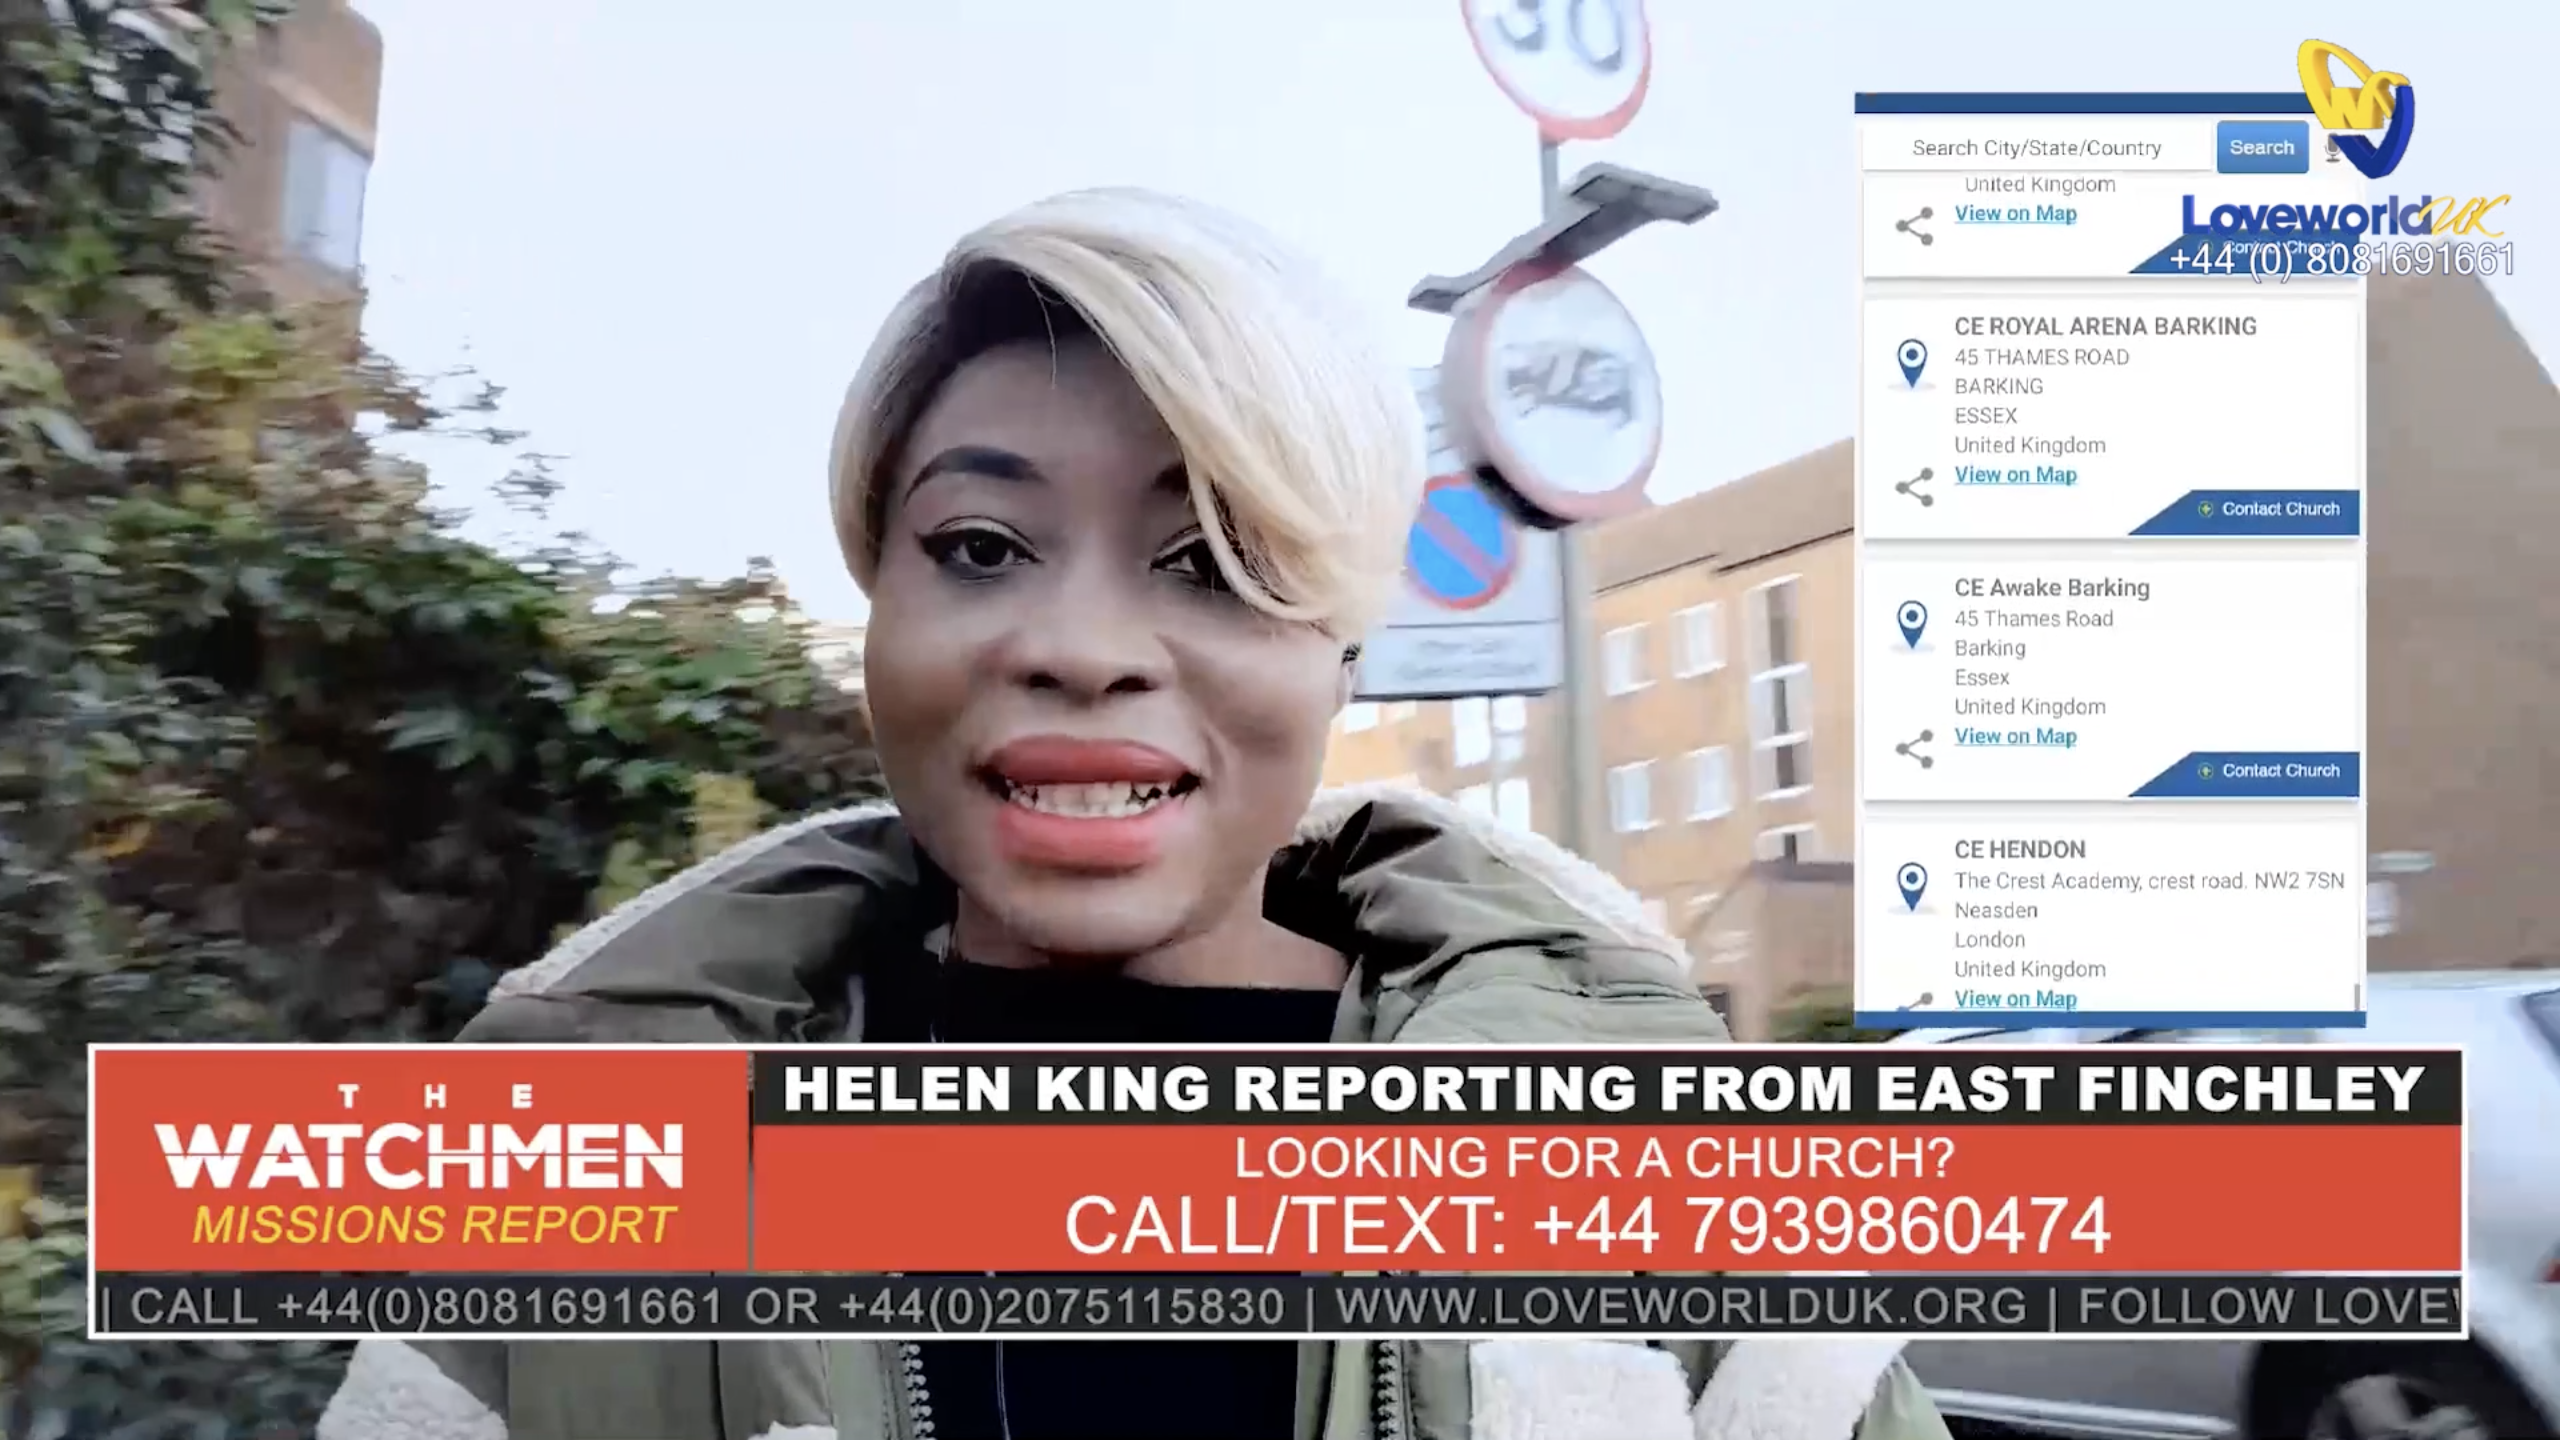 THE WATCHMEN_EP 102: HELEN KING'S SPECIAL REPORTS IN ICONIC LOCATIONS_HIGH BARNET, EAST FINCHELY, HIGHGATE, KENTISH TOWN, ANGEL, BRENT CROSS